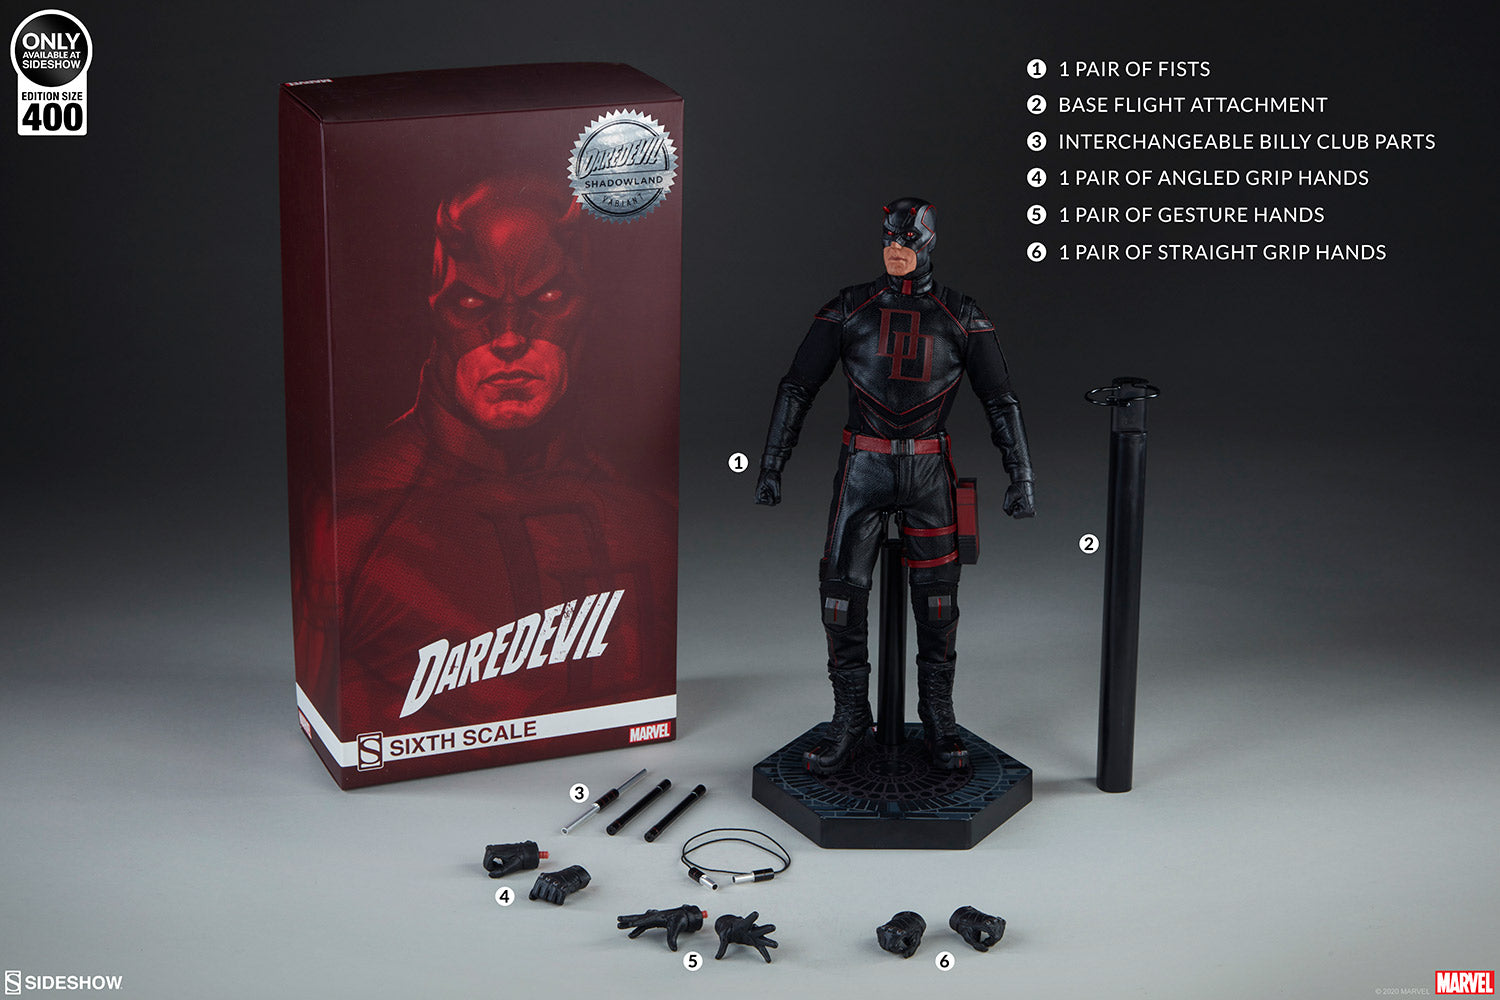 Daredevil: Shadowland Sixth Scale Figure with accessories and packaging